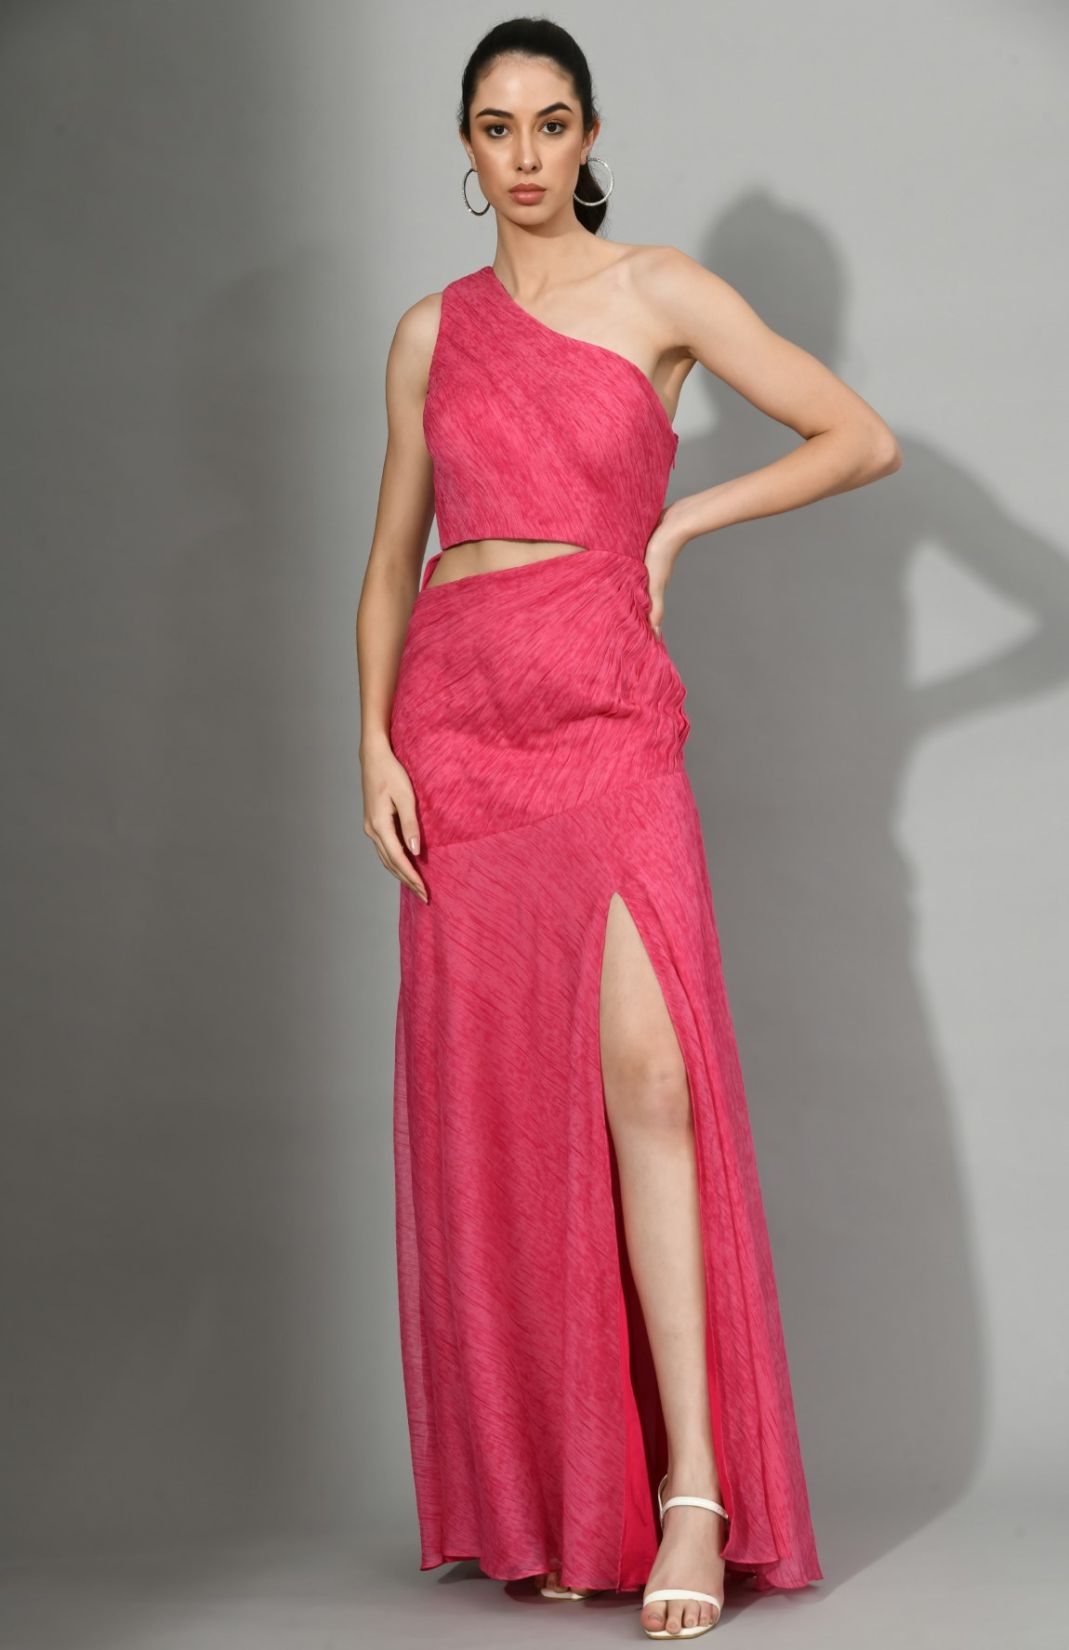 Pinked Up - Ruching Gown With Side Cuts And Slit In Pink Color